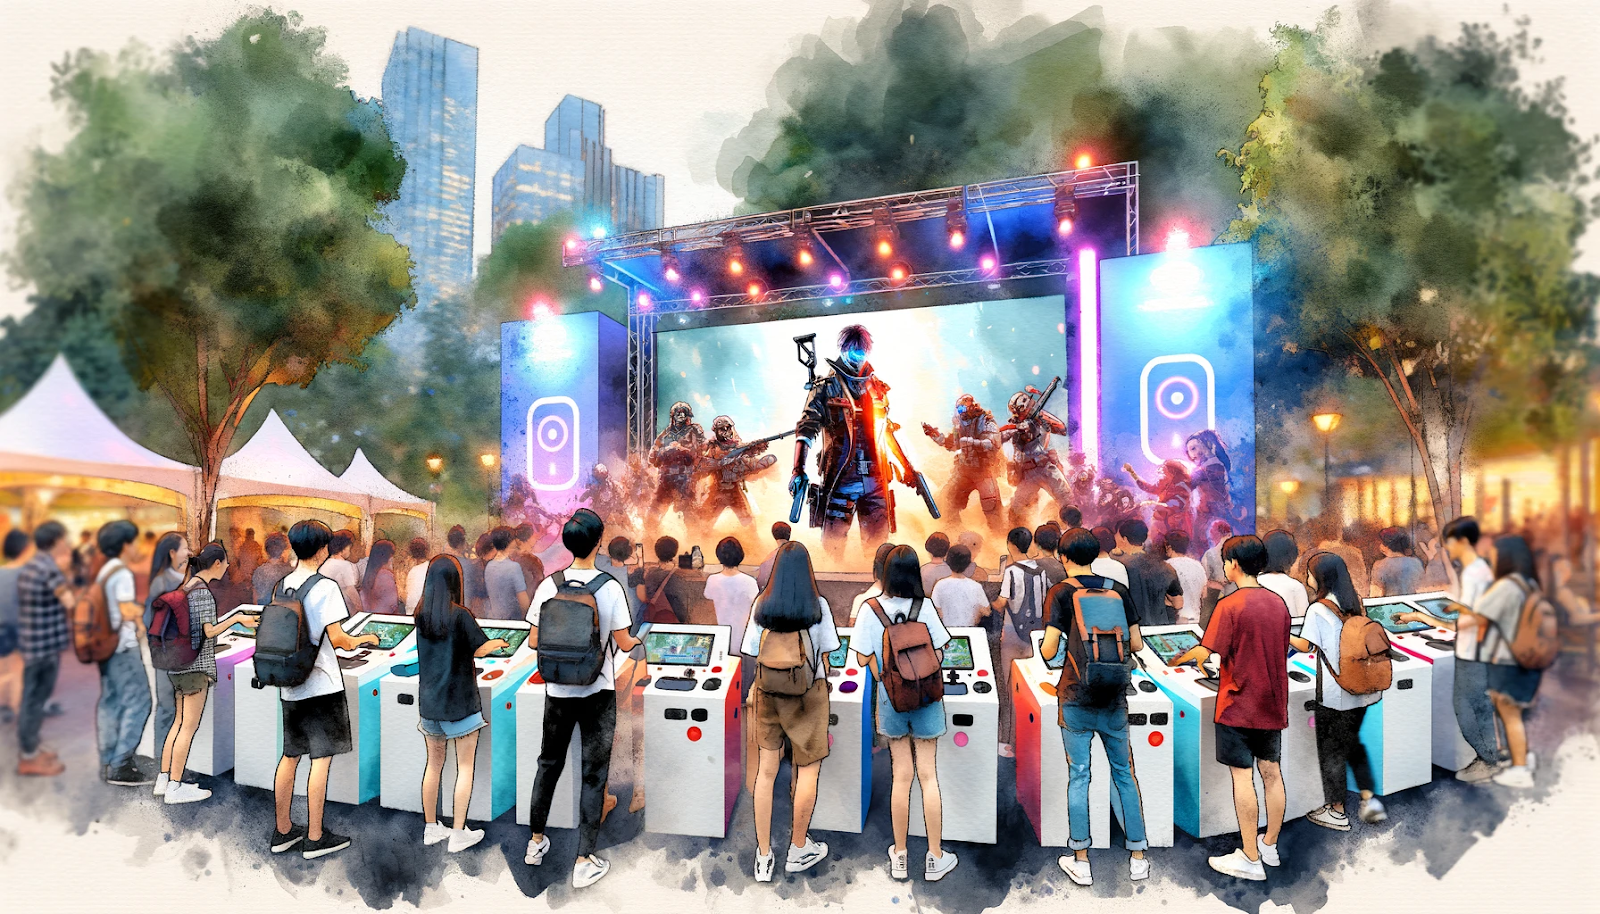 A group of excited gamers gathering around a large, interactive game setup in a public park